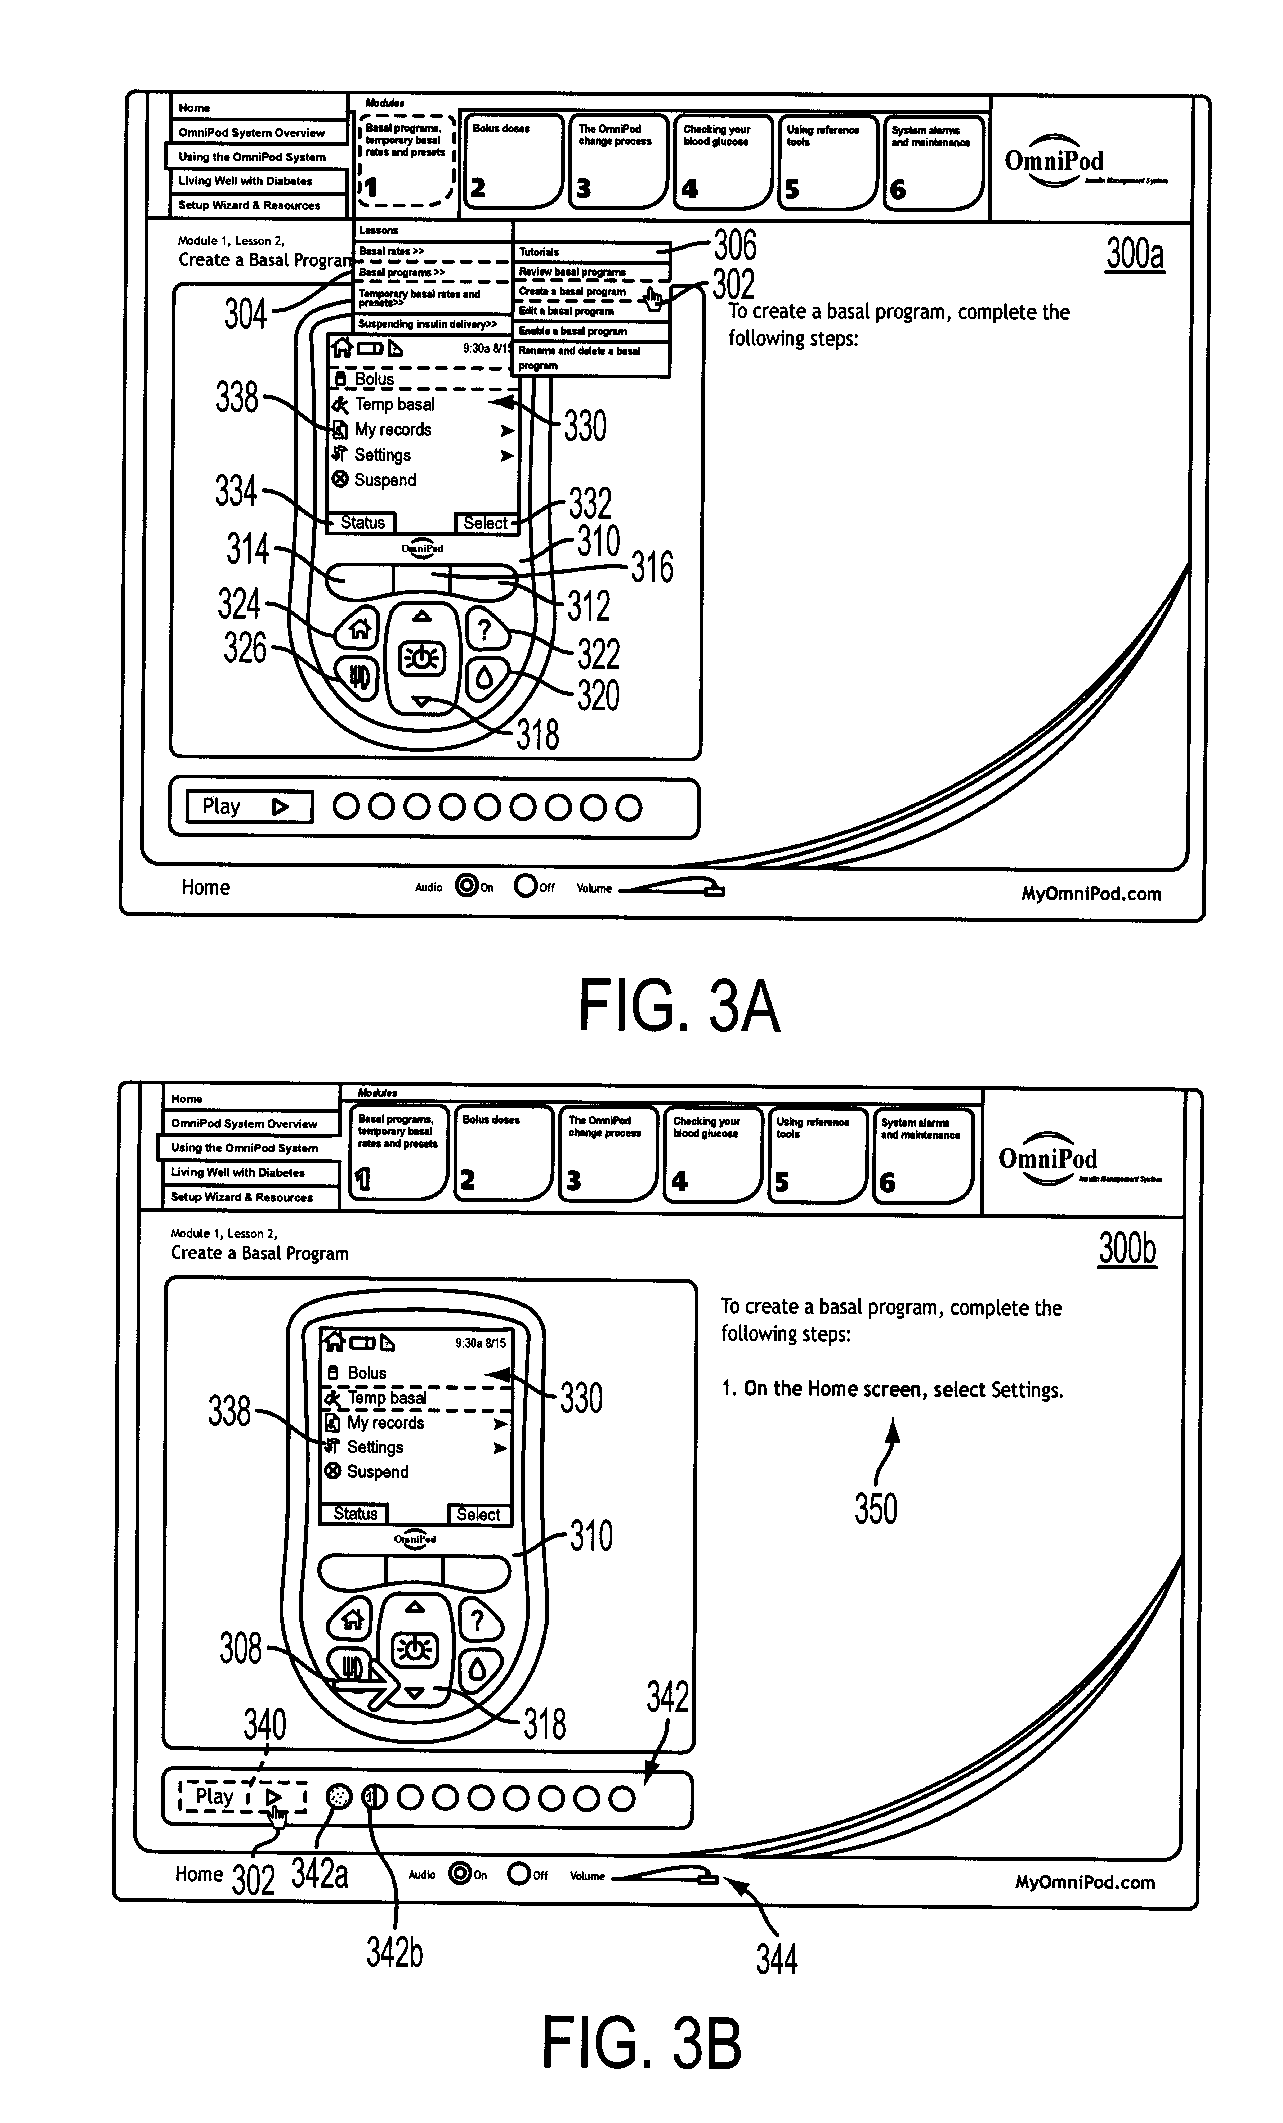 Interactive training system and method